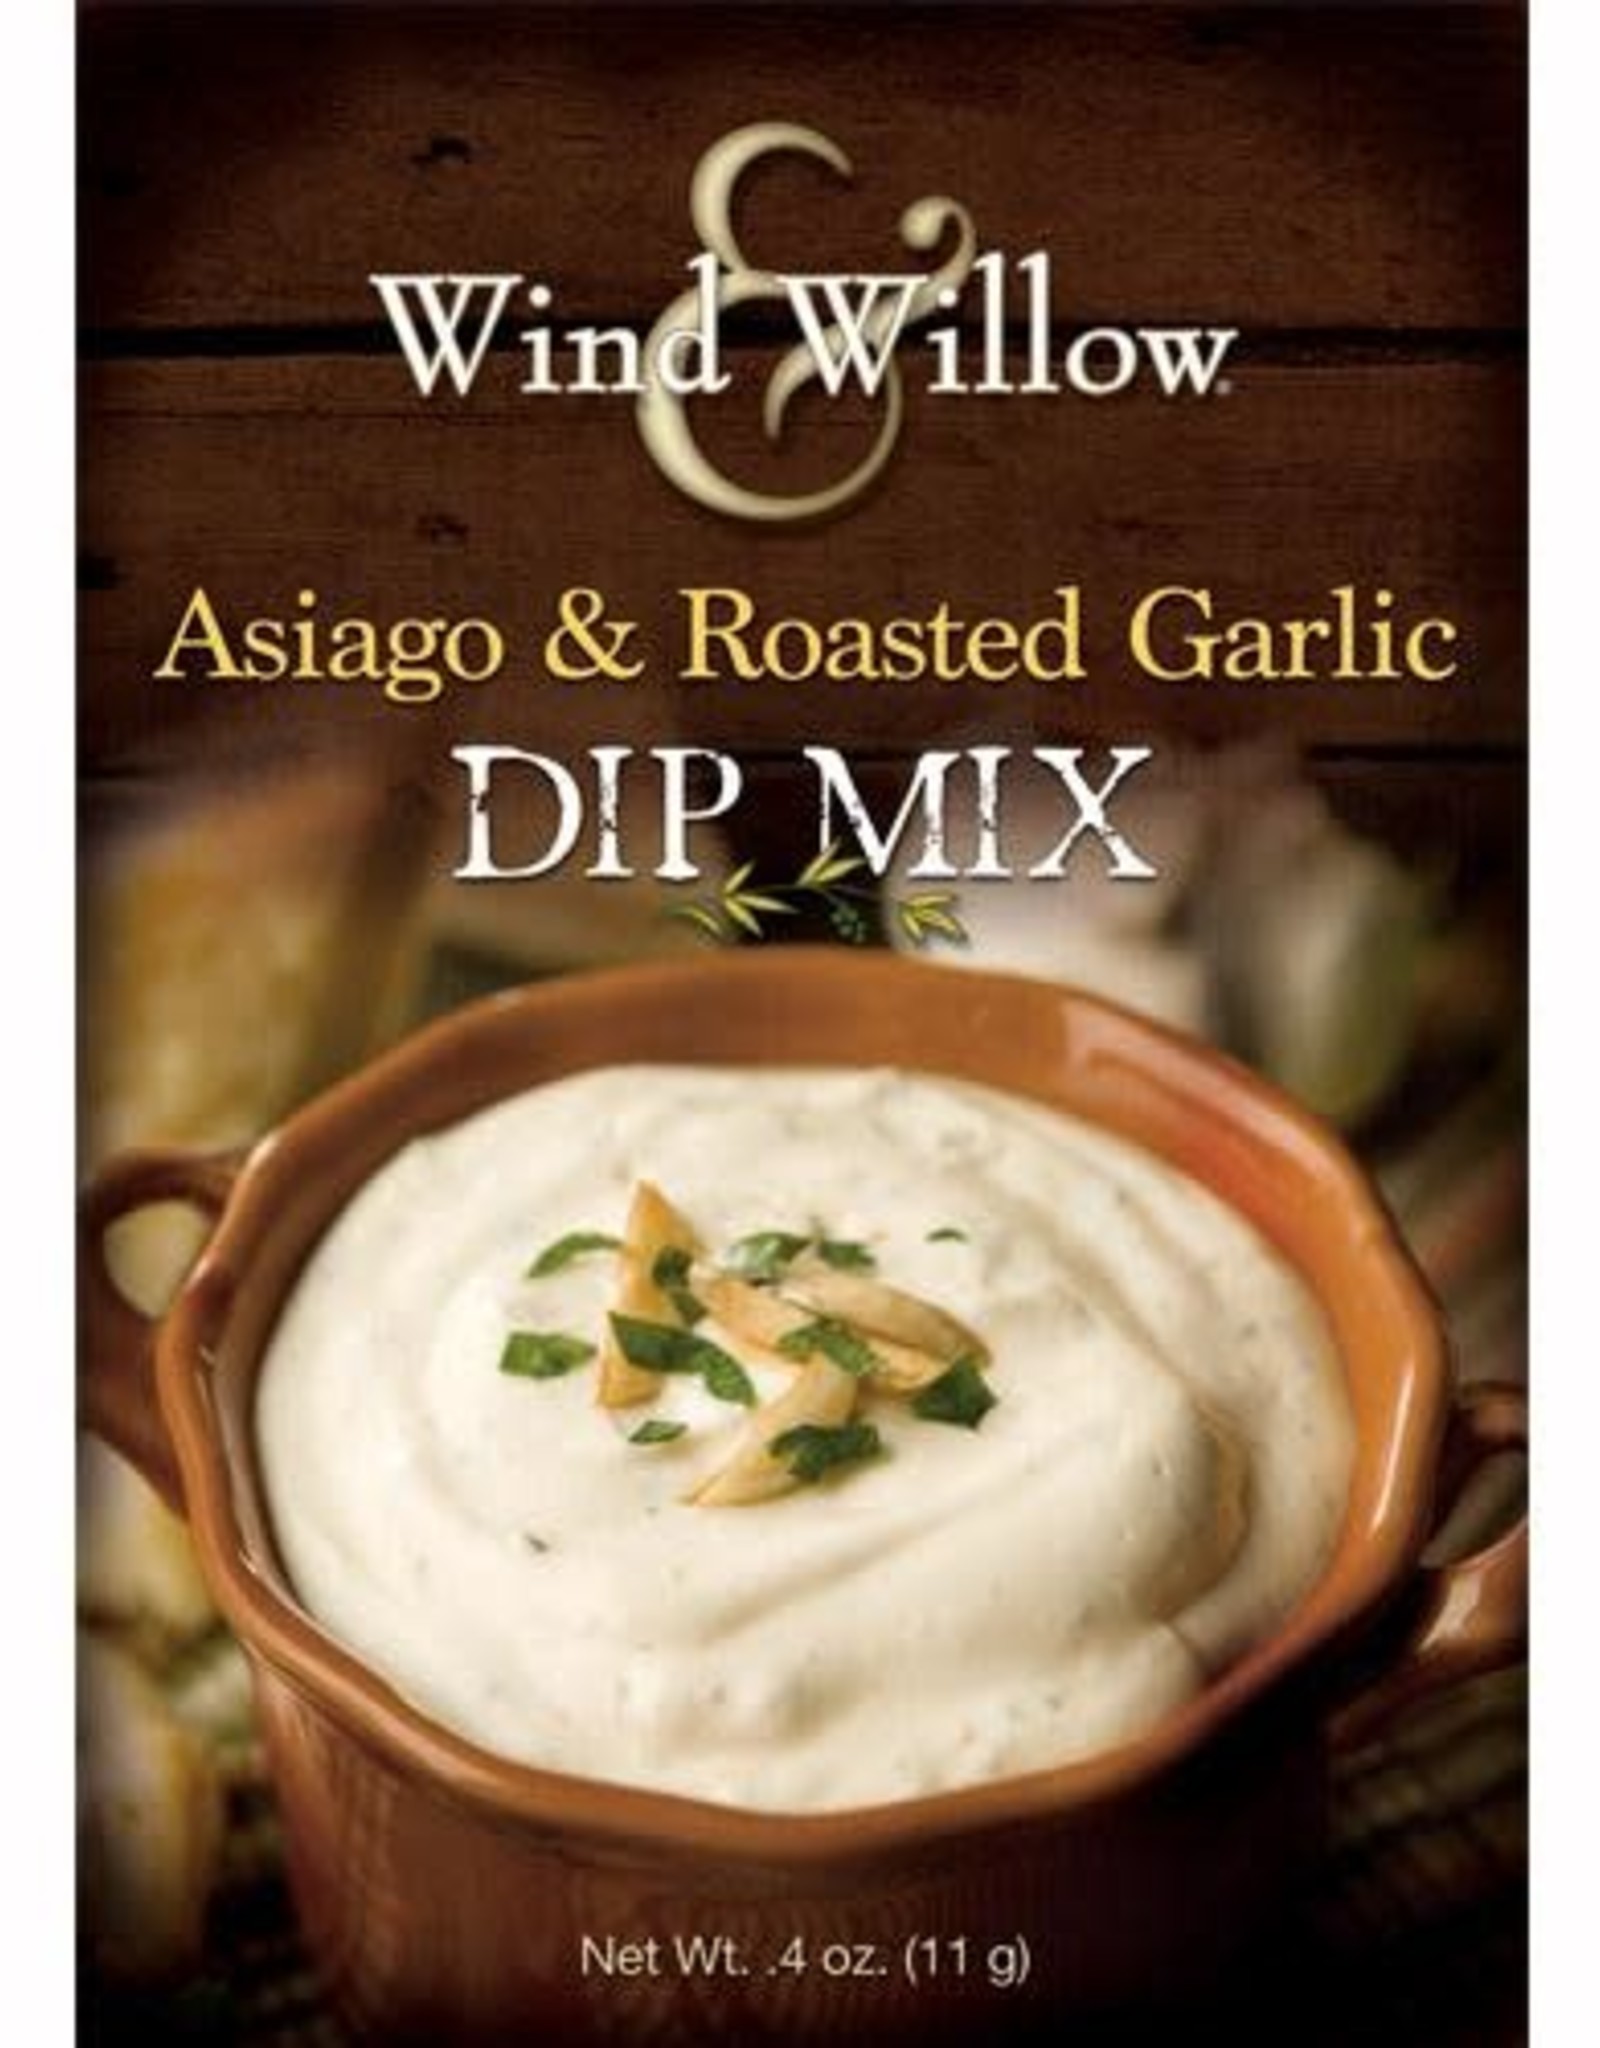 Wind and Willow WIND & WILLOW DIP MIX - smooth & creamy